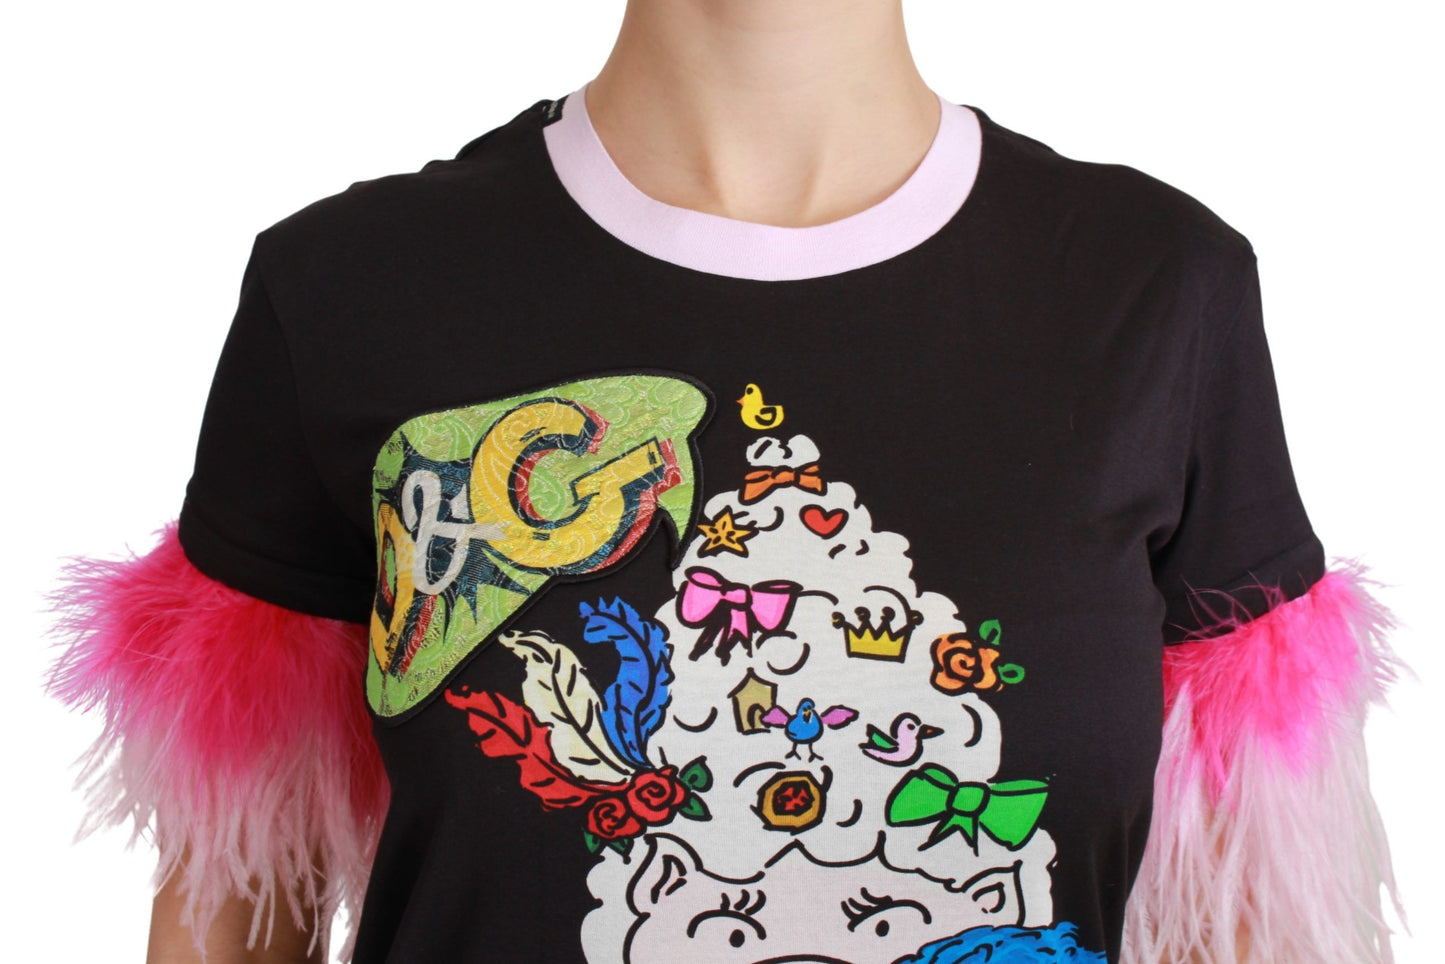 Chic Crewneck Year of the Pig Motif Tee